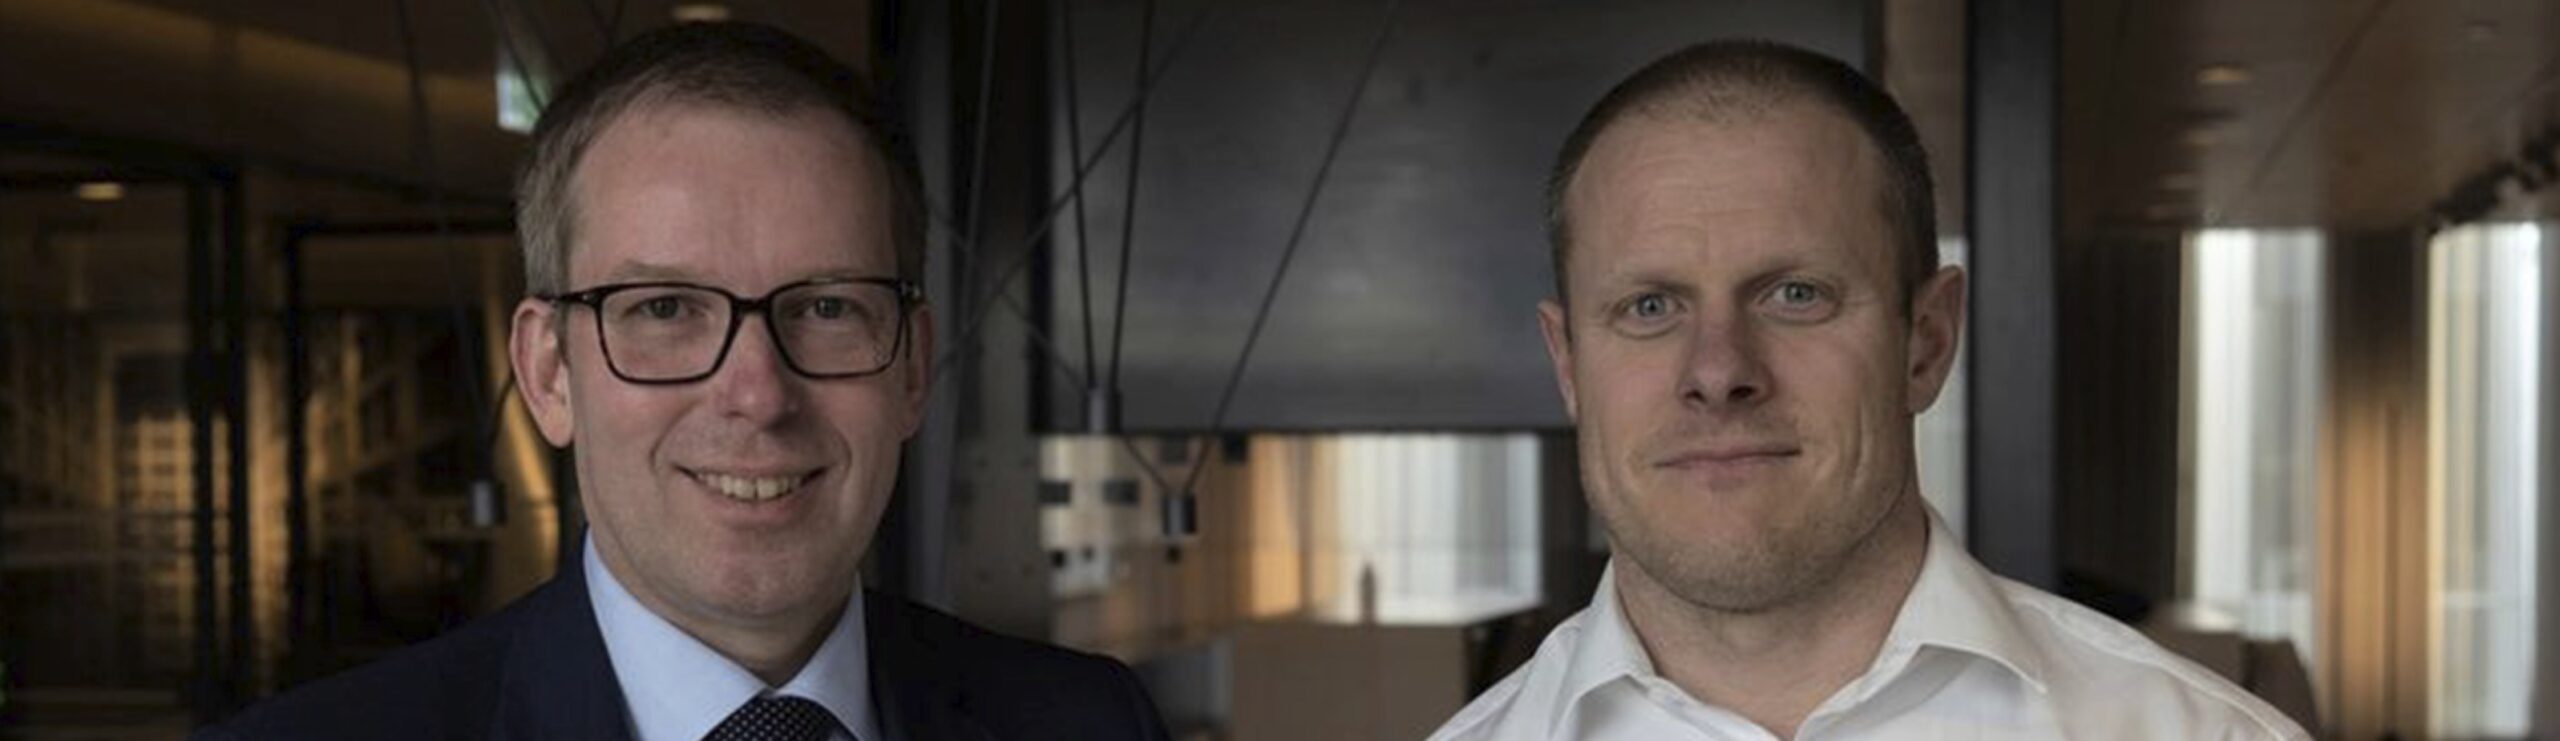 Aker BioMarine joins forces with Innovation Norway